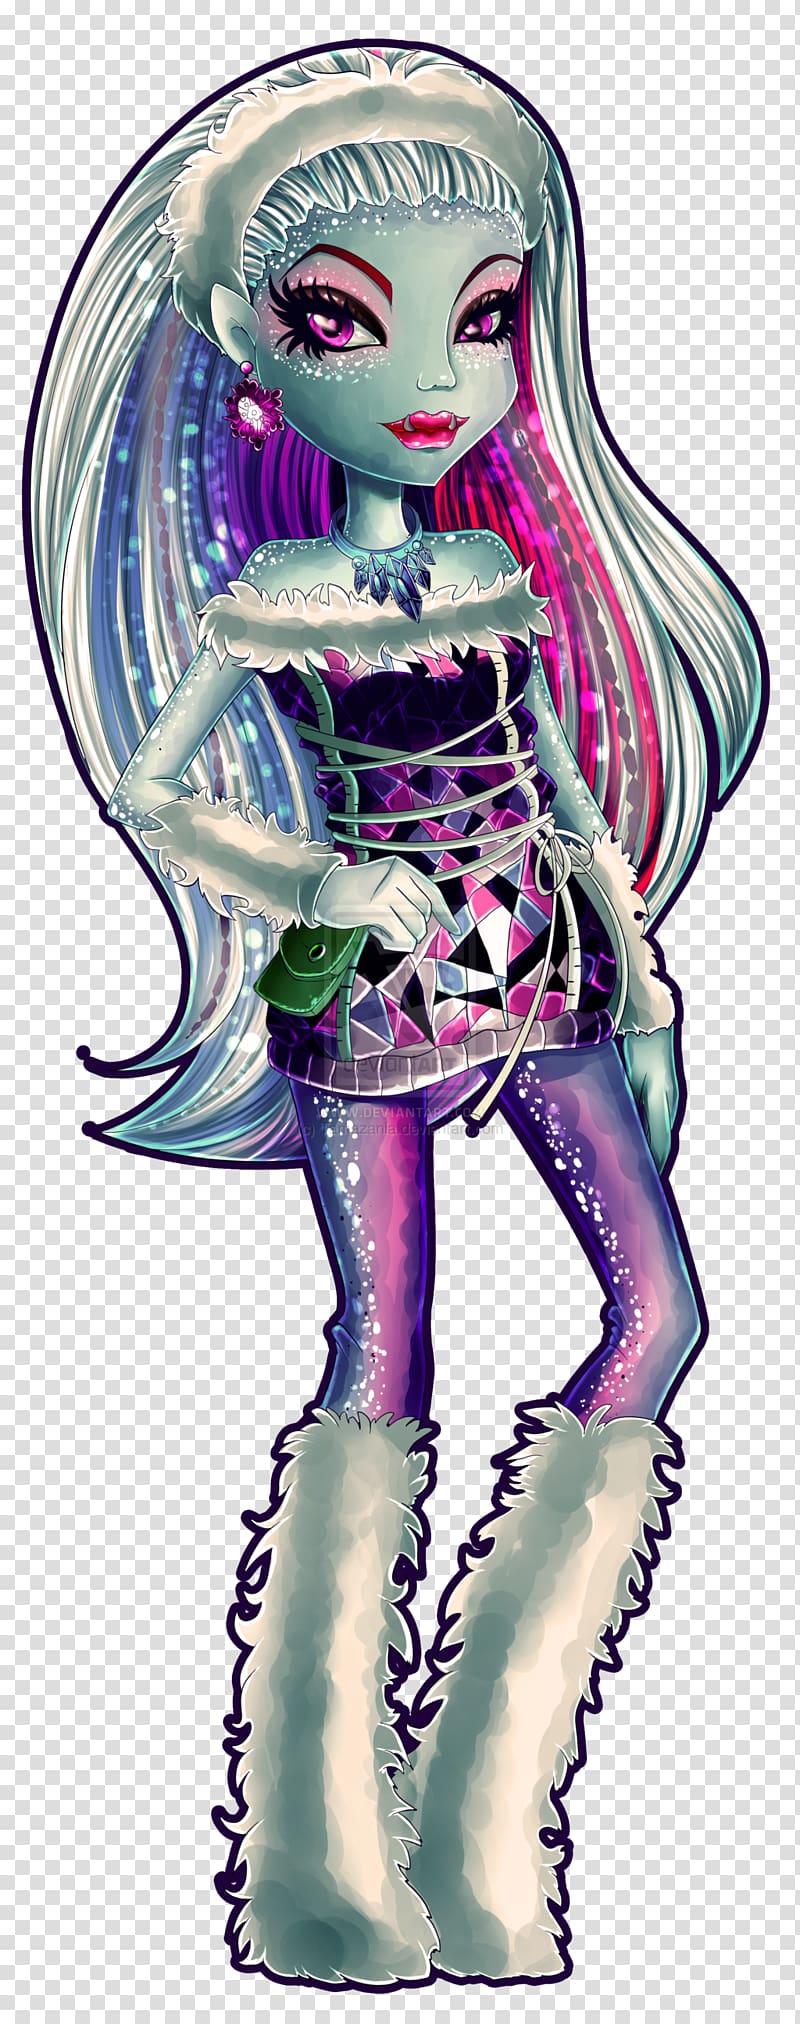 Illustration Cartoon Legendary creature Organism Doll, abbey bominable monster high transparent background PNG clipart